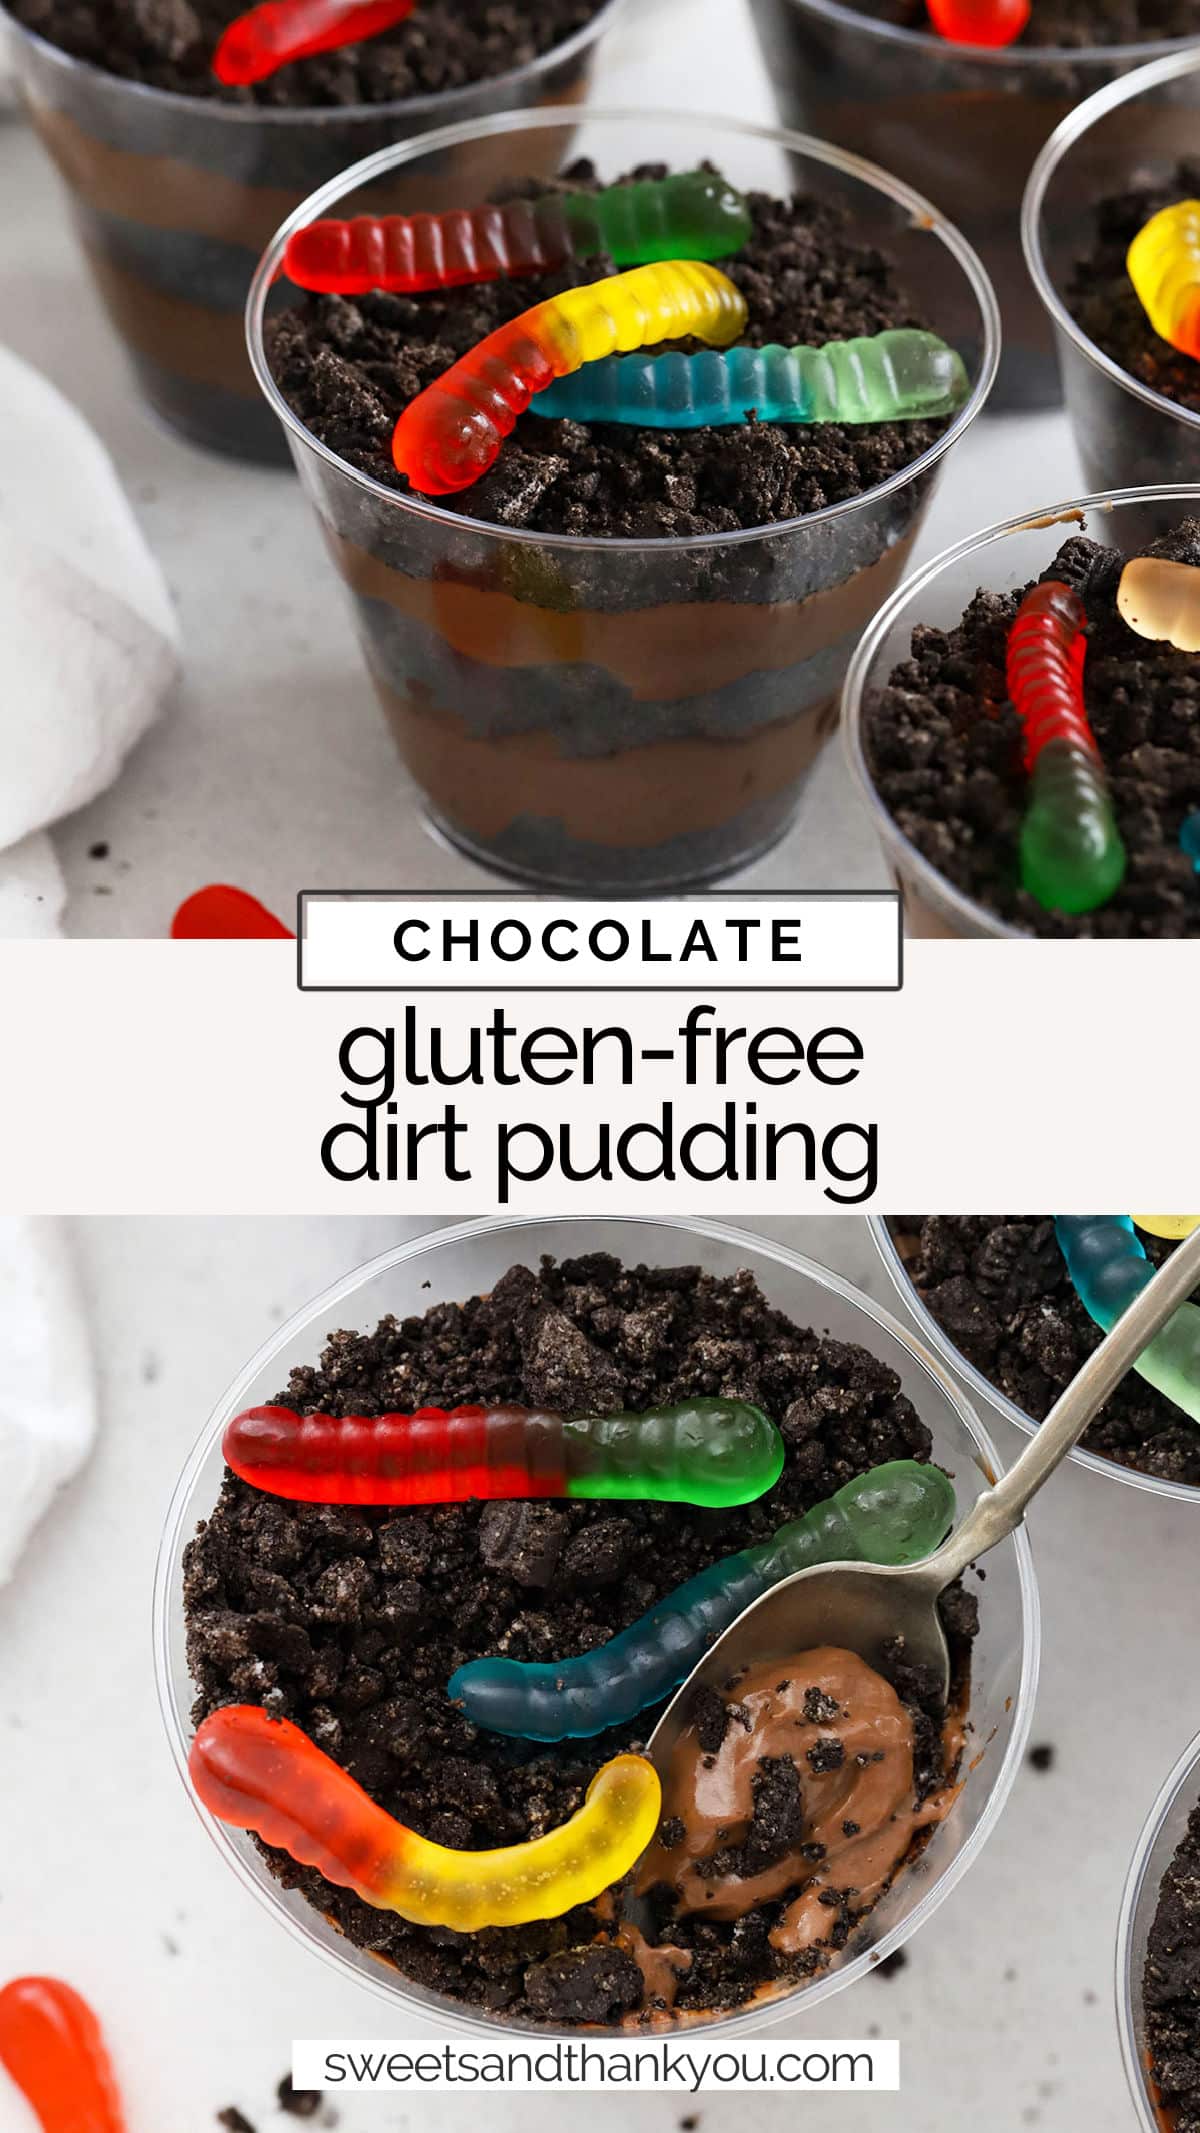 Get nostalgic with this easy gluten-free dirt pudding recipe! Don't miss all the cute ways to decorate it in the post. (+Halloween Ideas!) / Halloween dirt pudding ideas / cute dirt pudding ideas / gluten-free dirt pudding for halloween / dirt pudding recipe / gluten-free dirt cake recipe / gluten-free dirt cake / gluten-free halloween dessert / gluten-free pudding dessert / gluten-free pudding recipe /